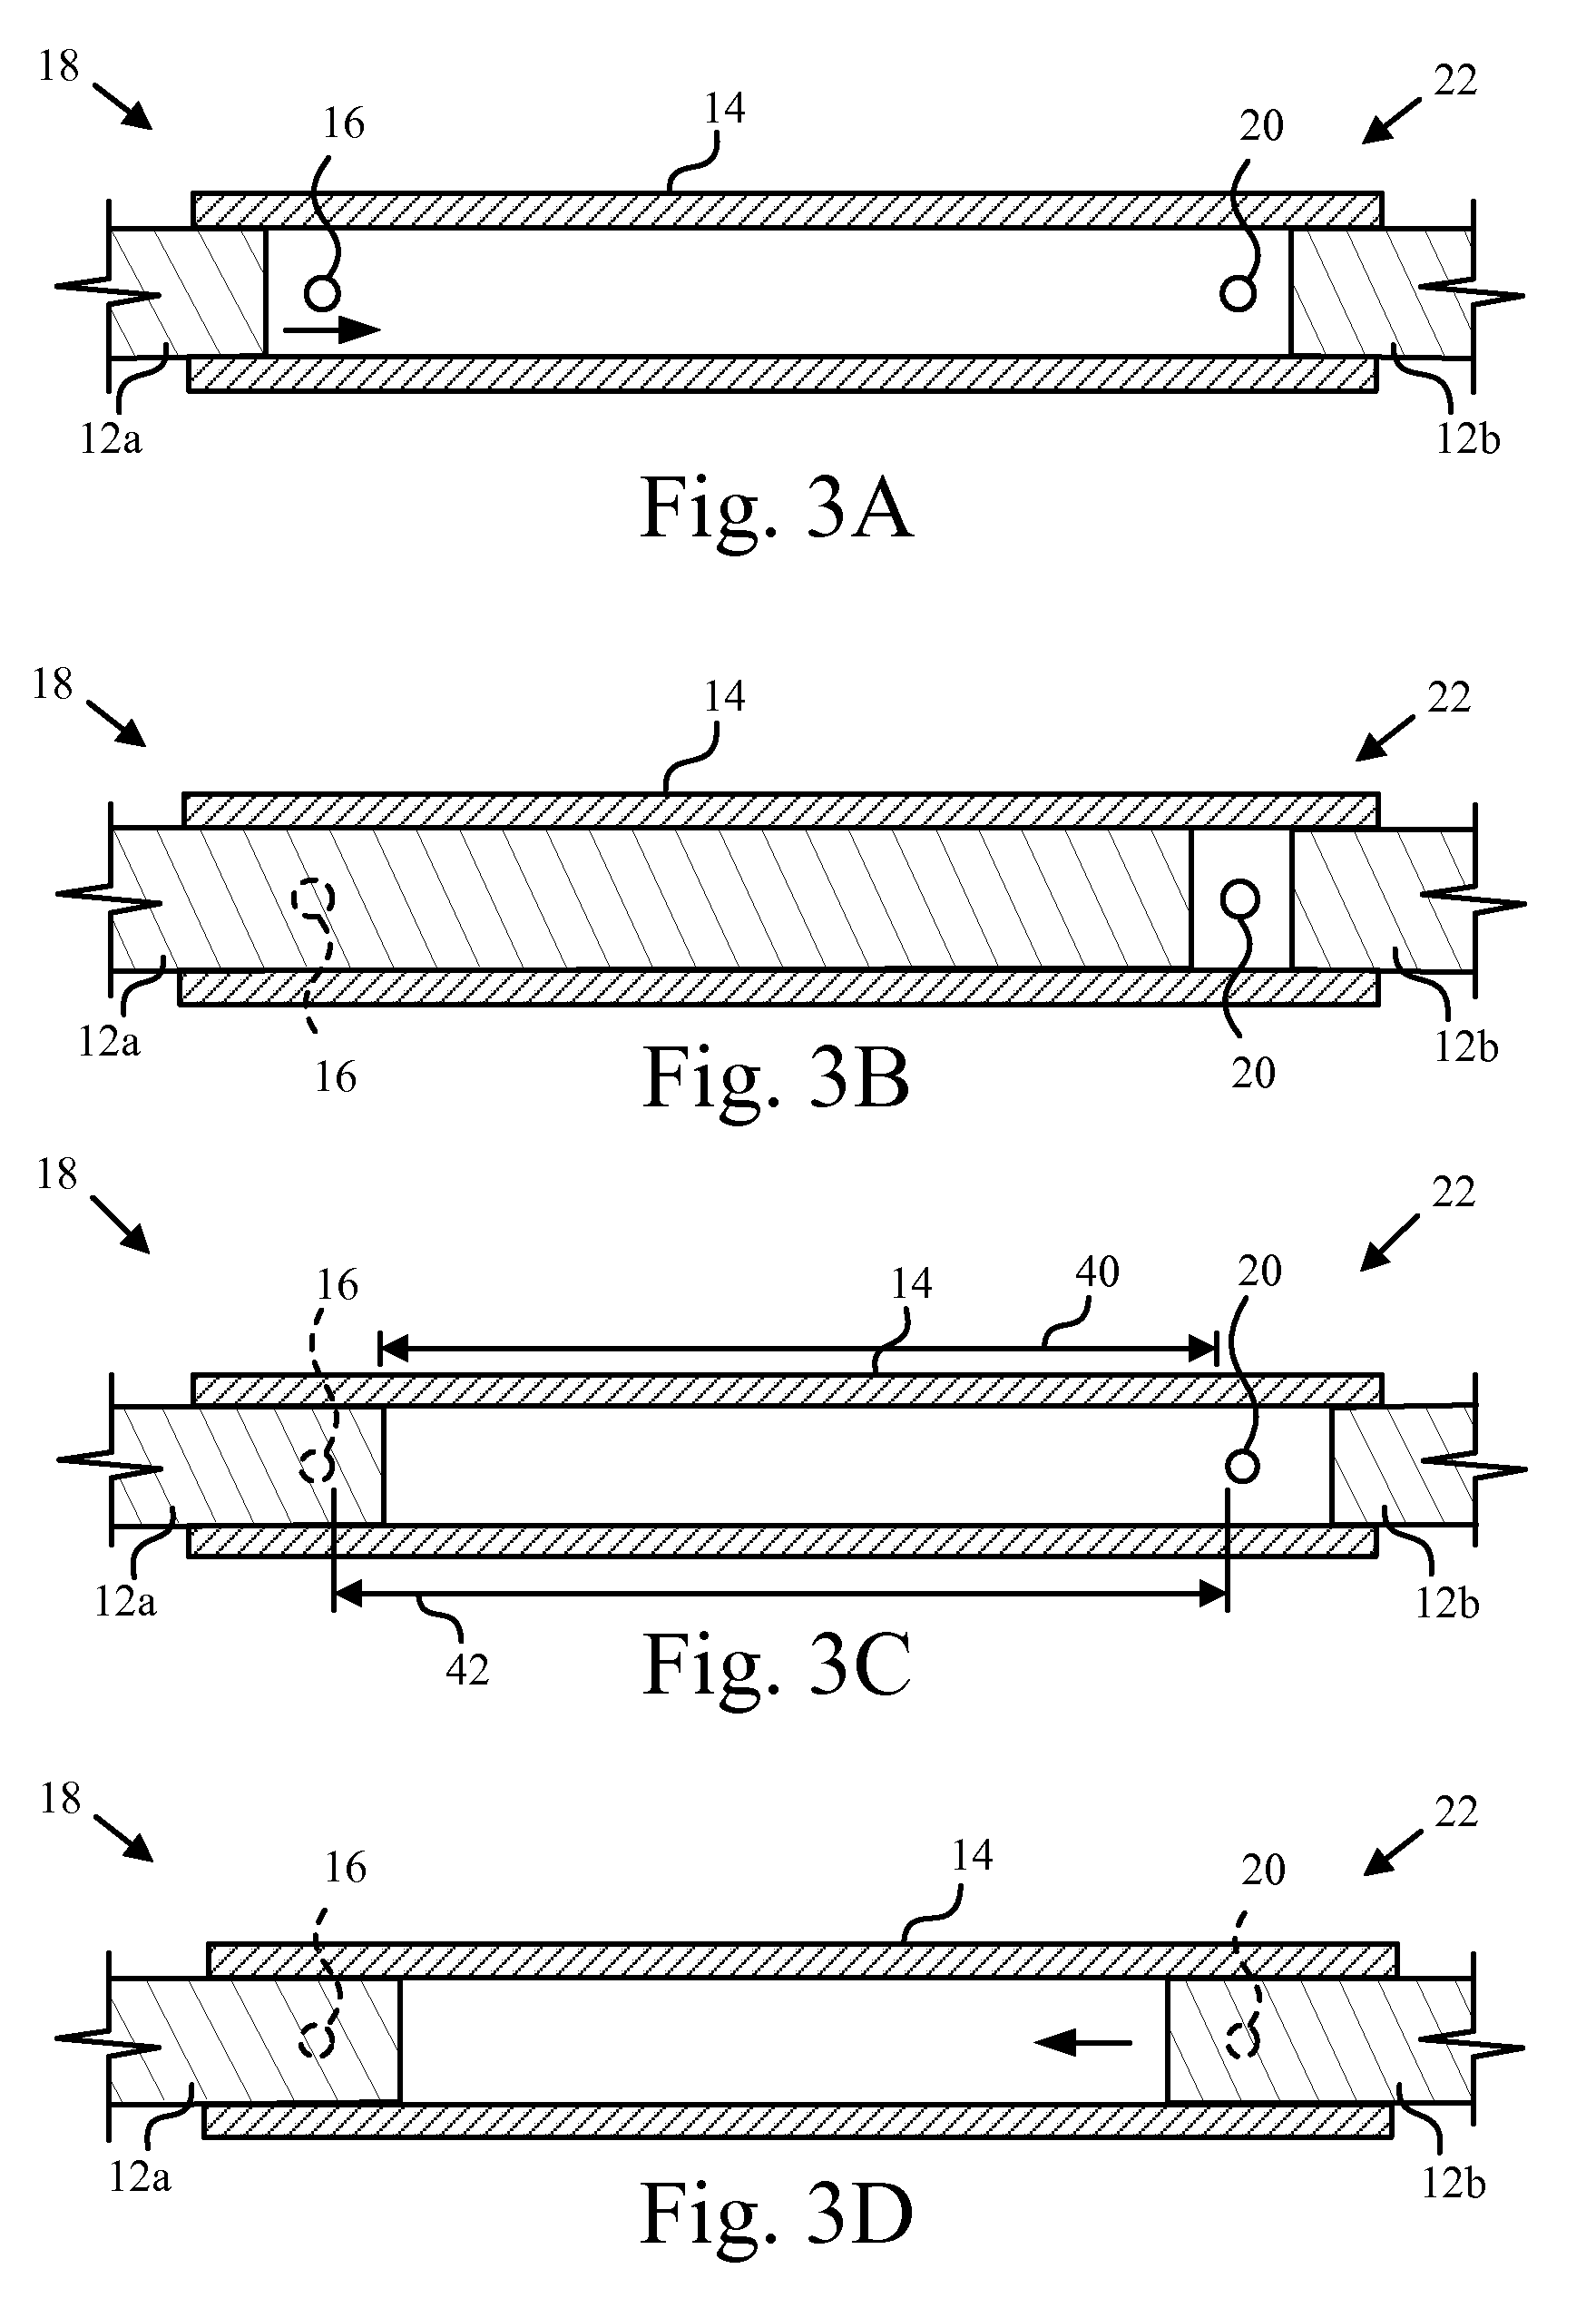 Paired-piston linear engine